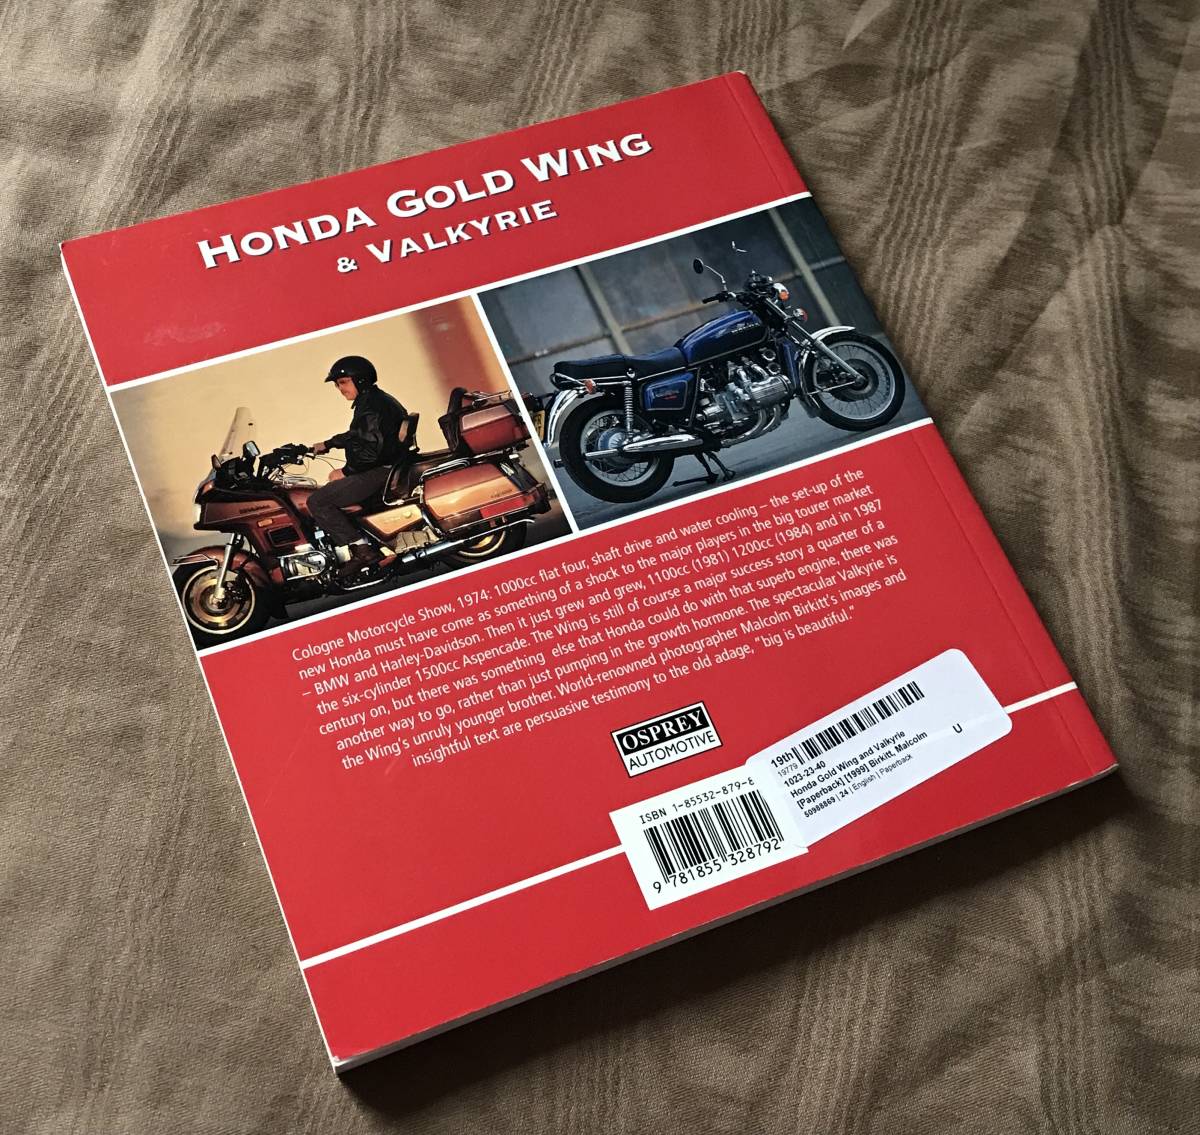  Honda Gold Wing & Valkyrie search :GOLD WING VALKYRIE GL1000 1200 1500 F6C photoalbum custom service manual 